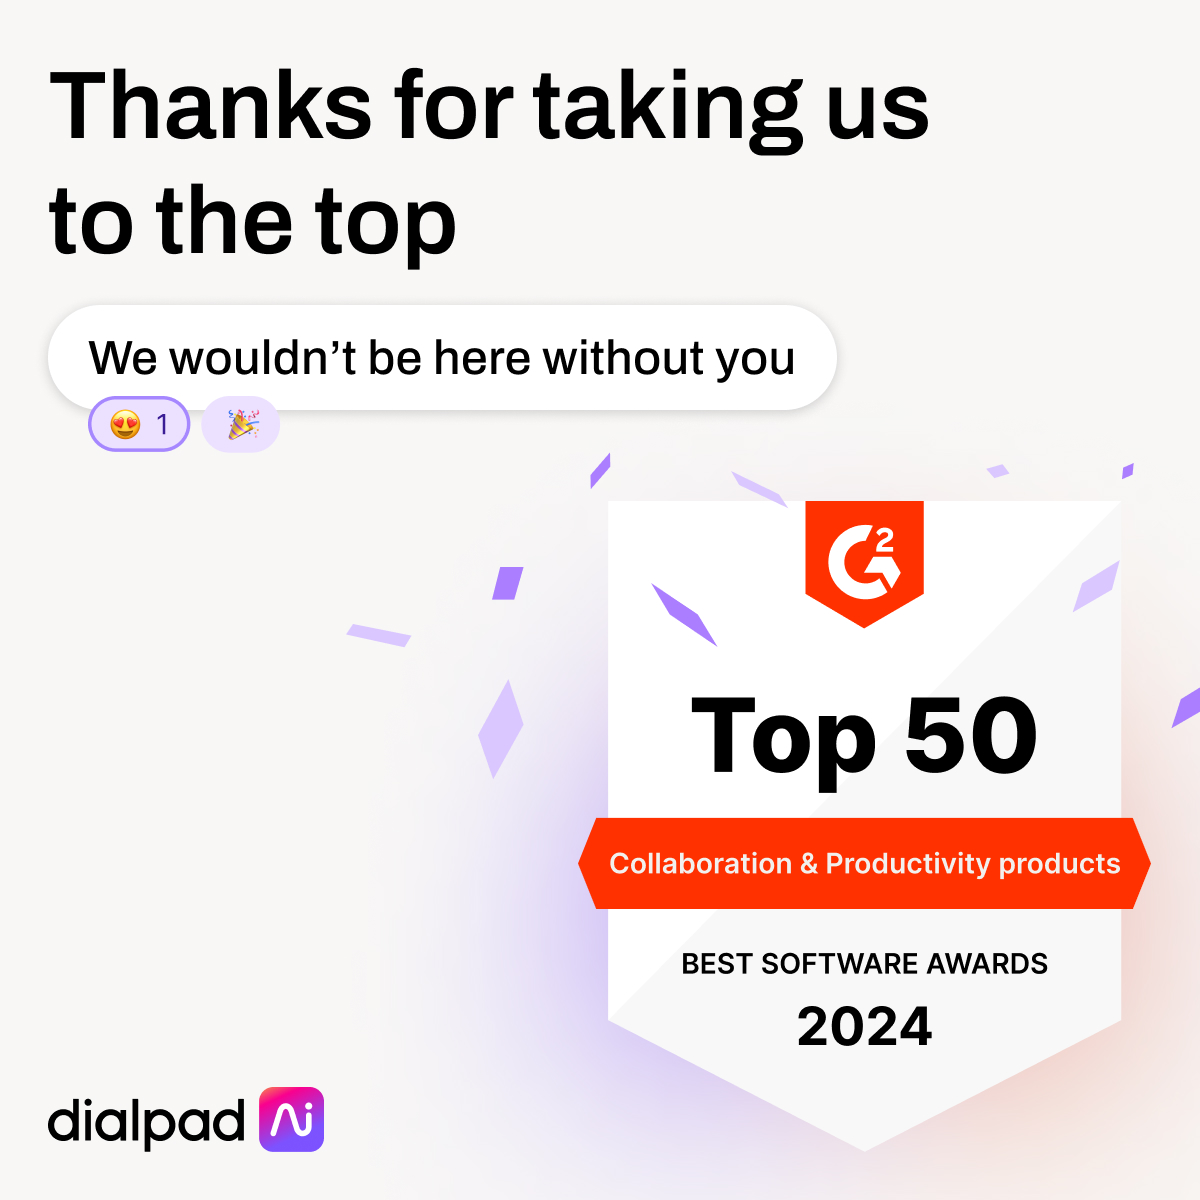 🏅 Guess who made it to @G2dotcom's Top 50? Yup, us! Thanks to all you awesome users for keeping us in the spotlight! Let's celebrate with virtual high-fives and maybe a victory dance or two 💃🕺 #G2Top50 #Dialpad #Ai